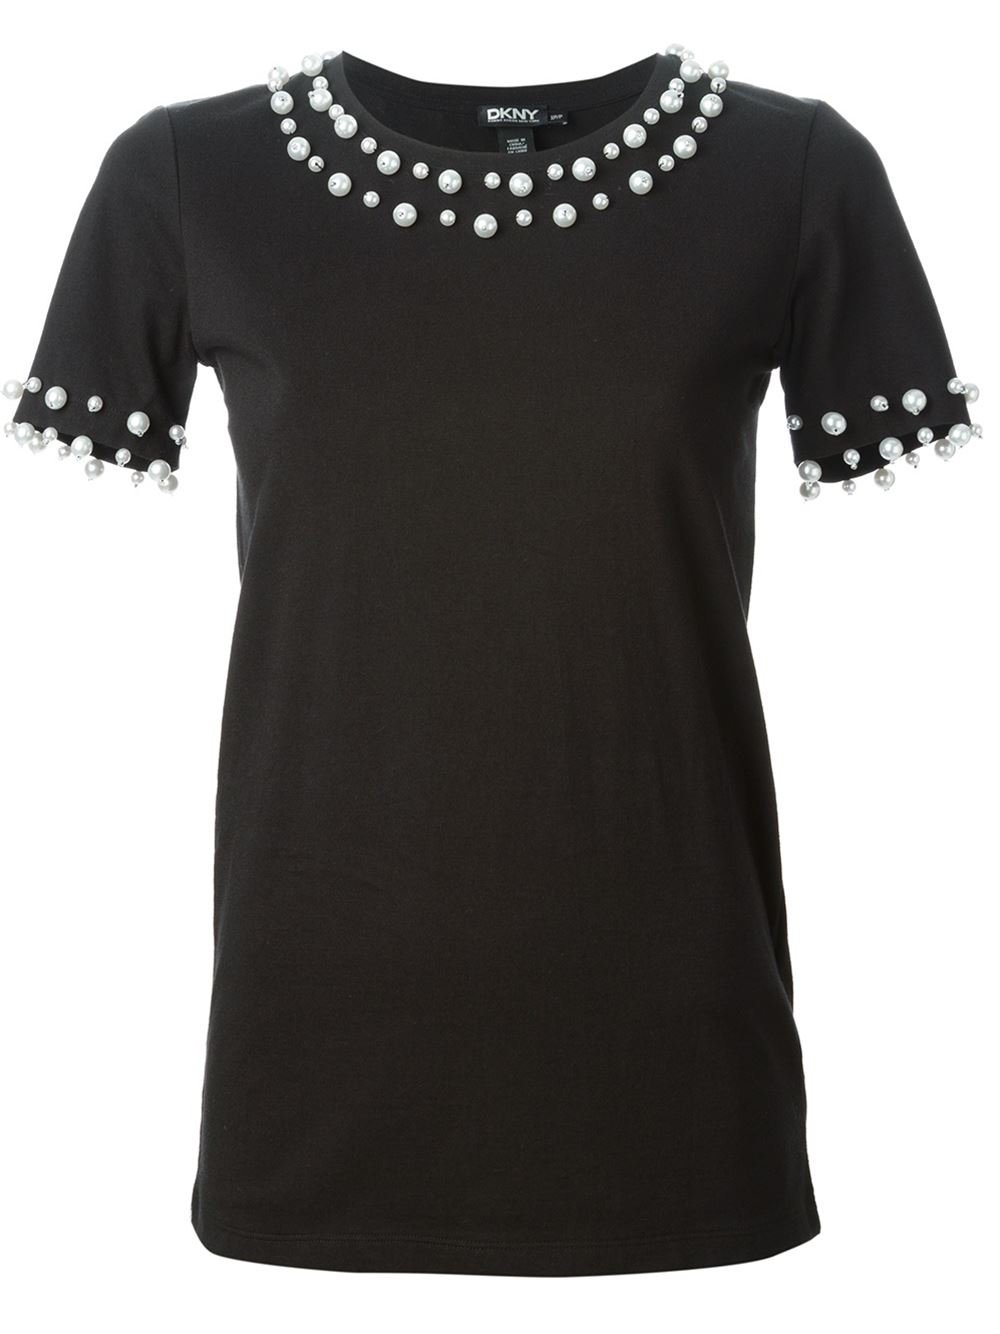 DKNY Pearl Embellished T-Shirt in Black - Lyst